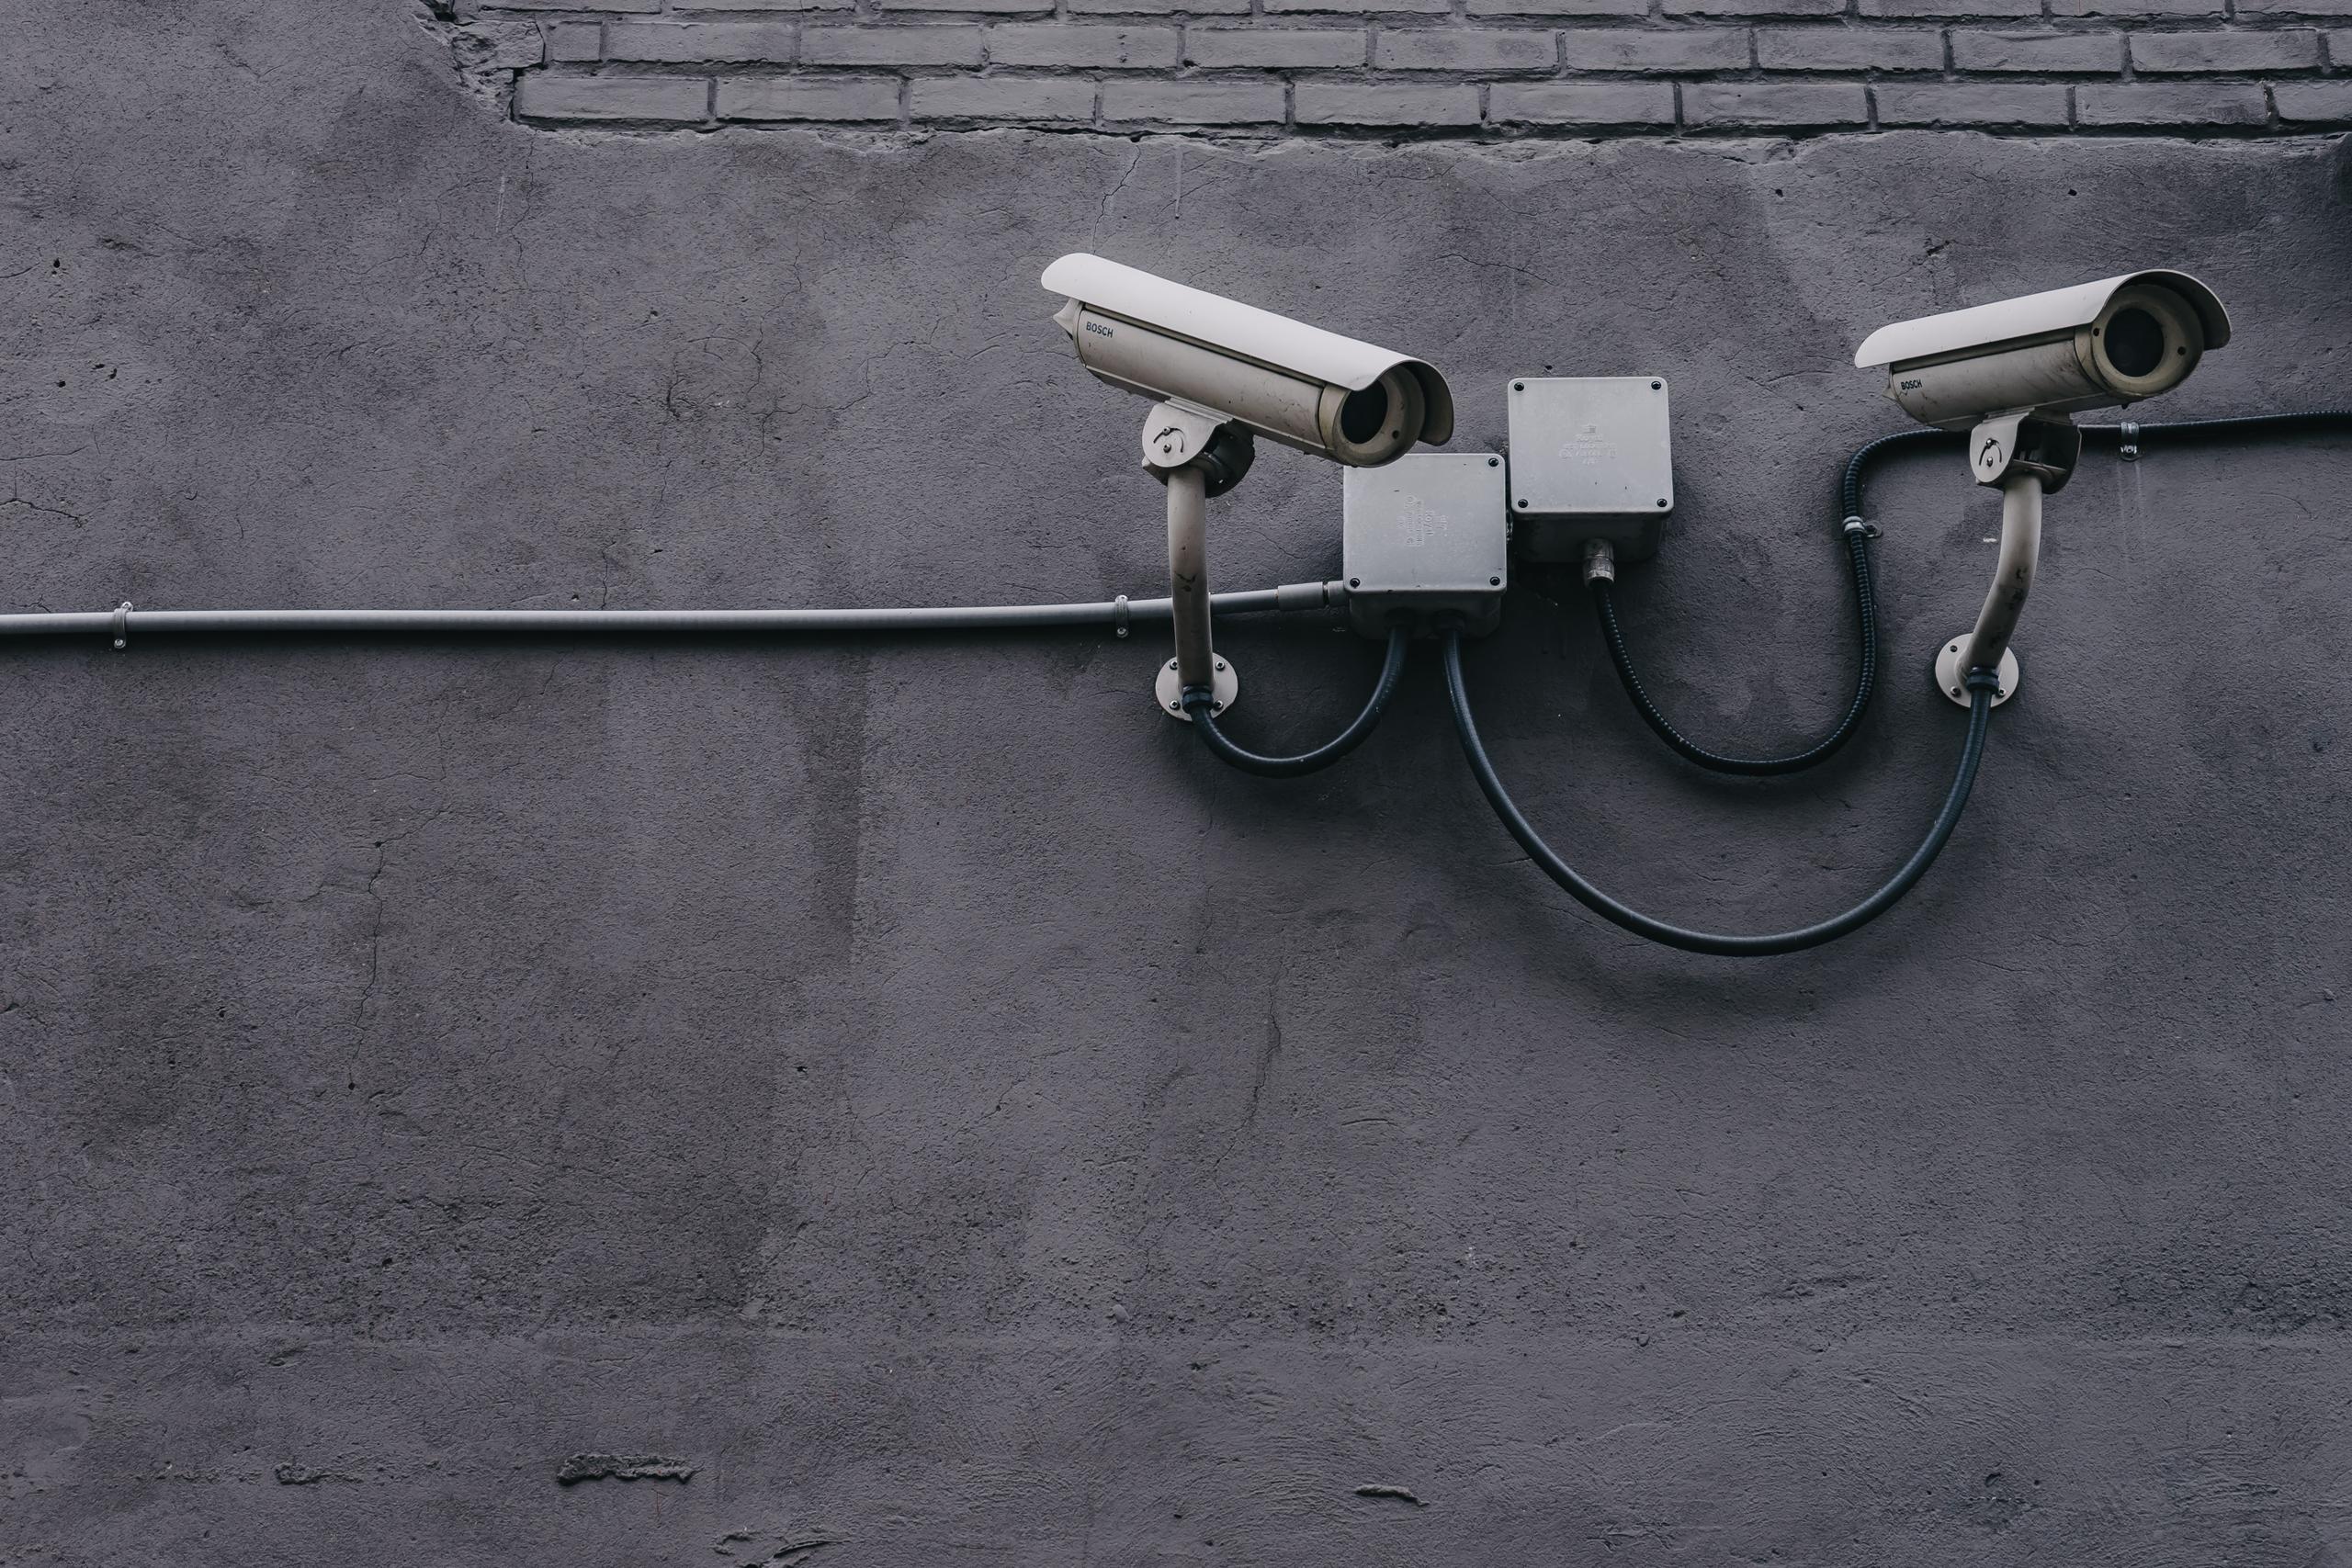 2 security cameras mounted on a wall